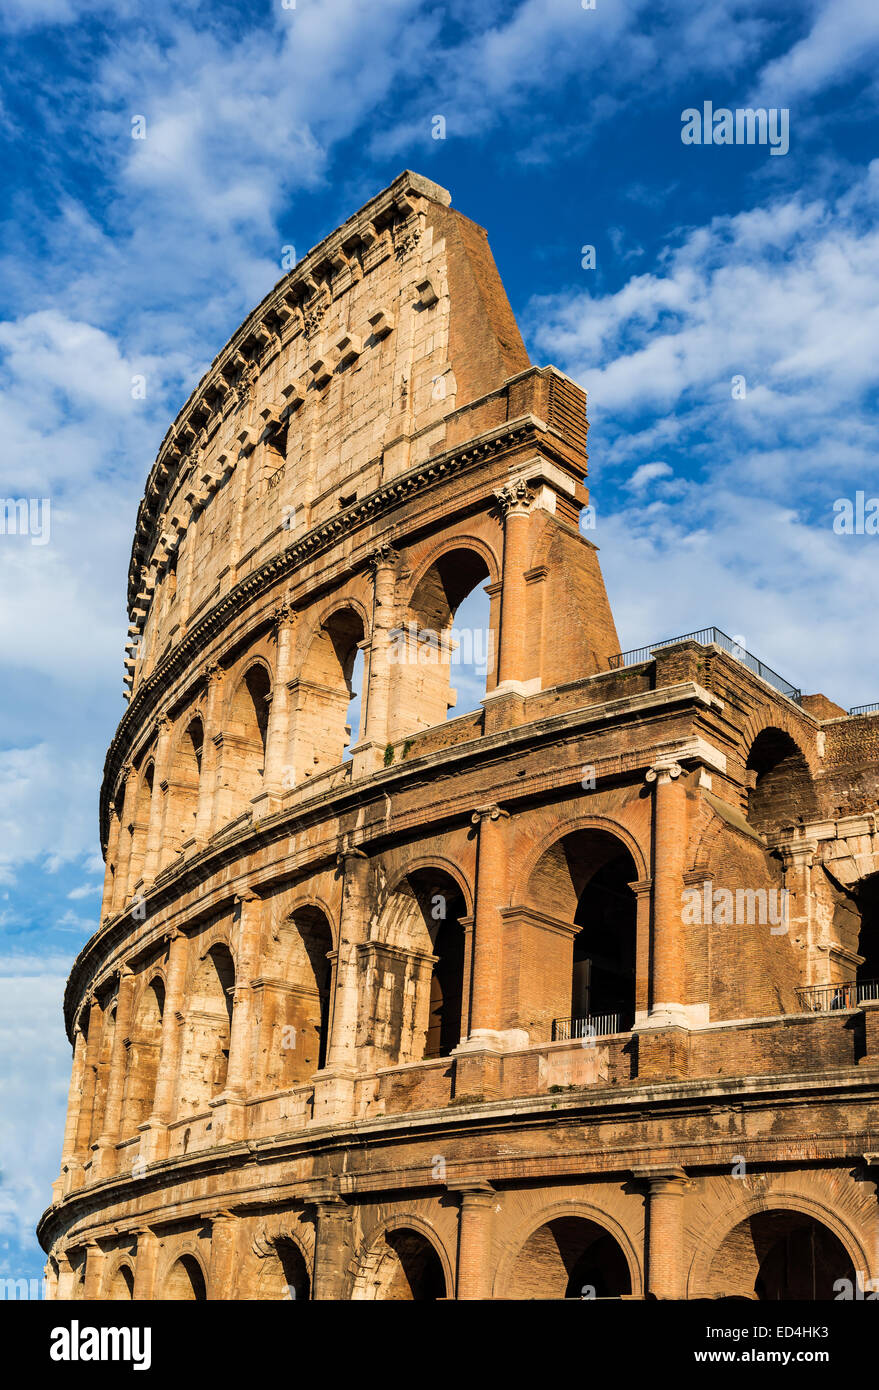 Colosseum, Rome, Italy. Twilight detail view of Coliseum, elliptical Flavian Amphitheatre largest in Roman Empire built in 80AD Stock Photo